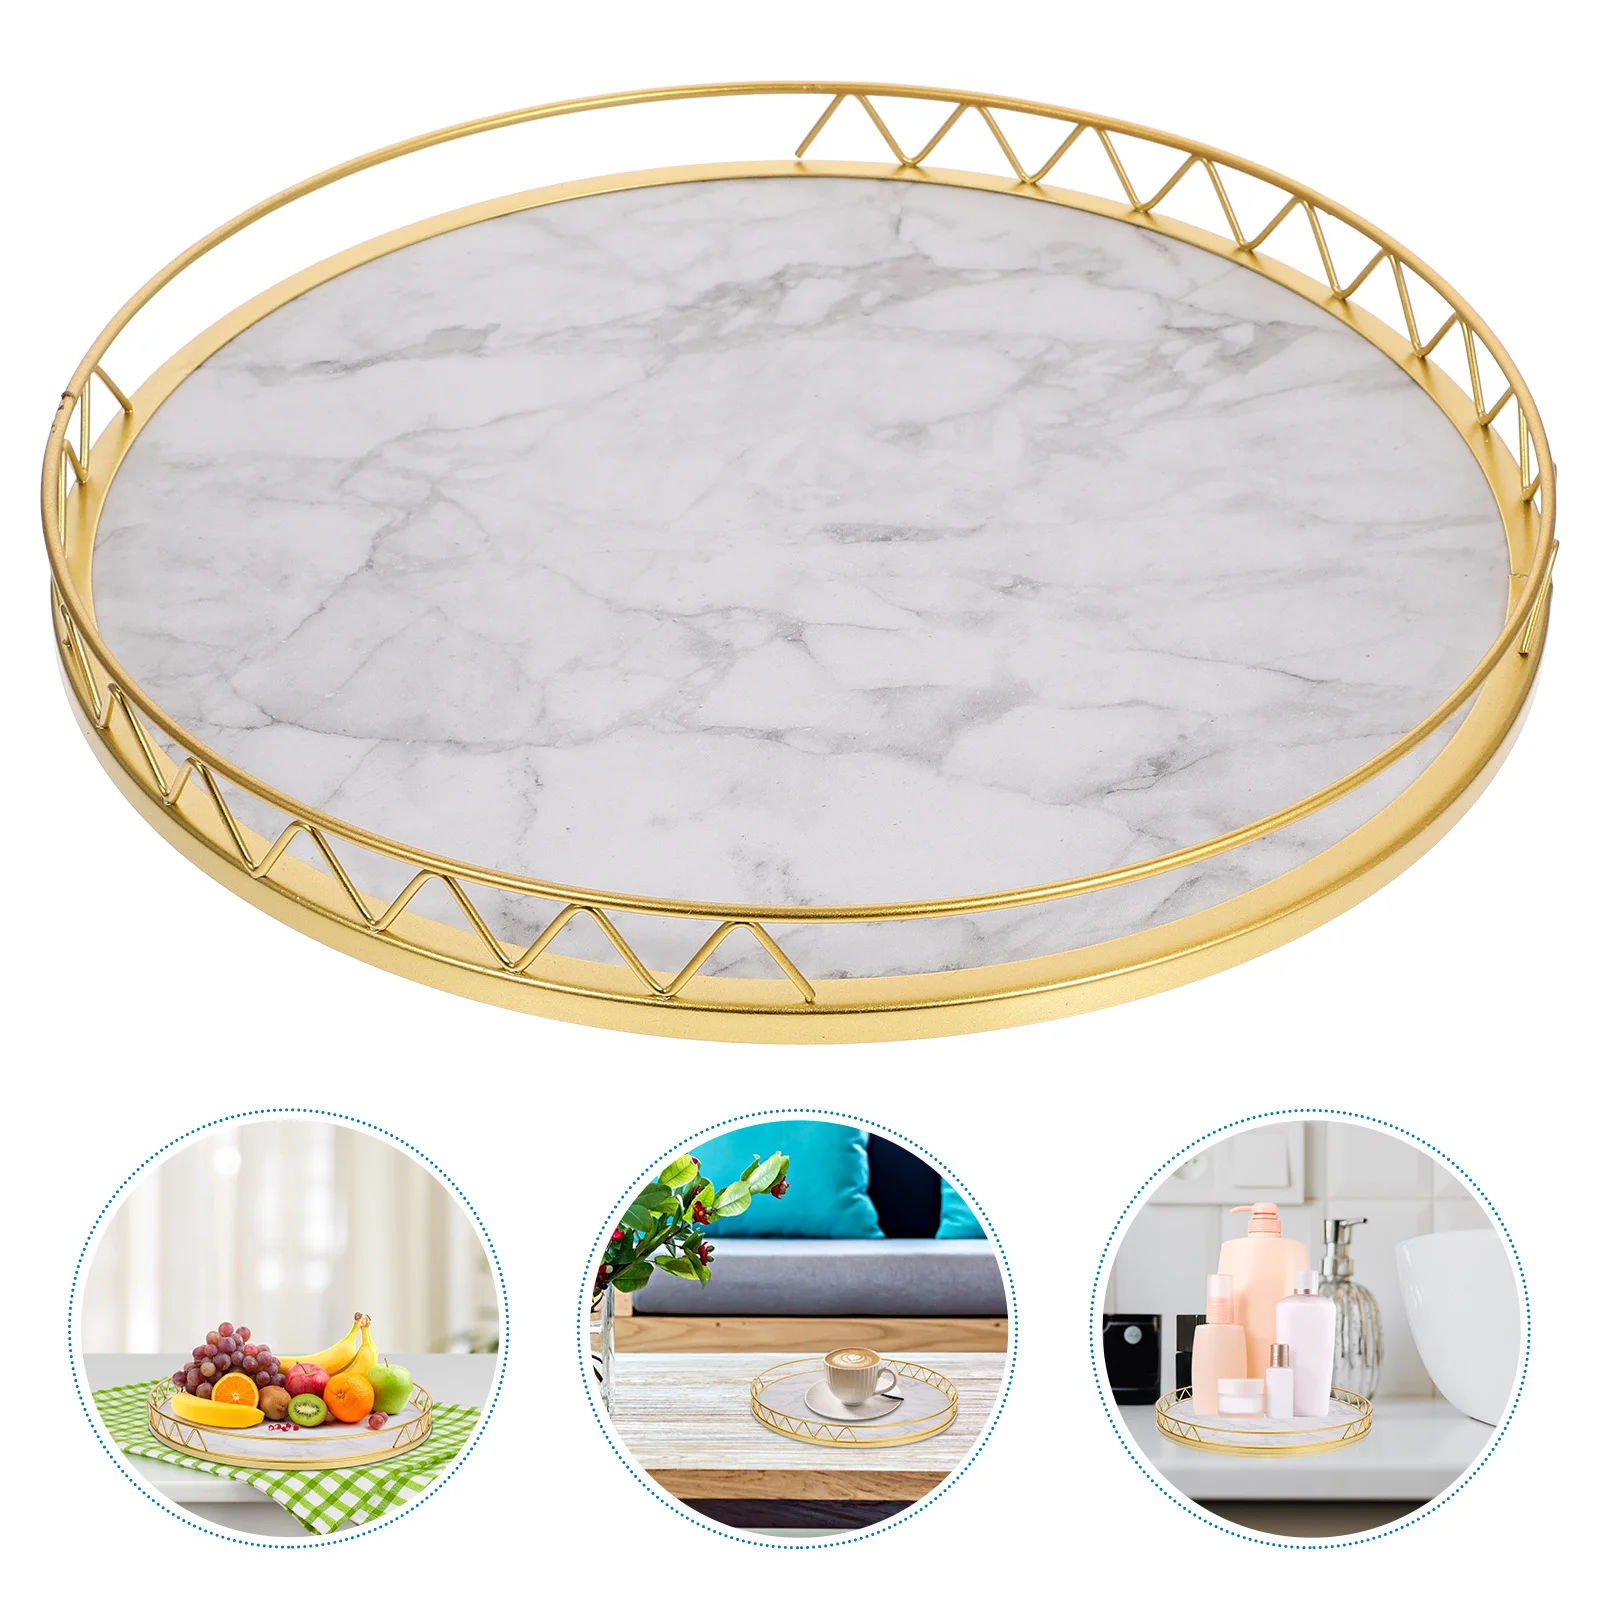 

Circle Tray Round Party Fruit Holder Storage Decorative Serving Tea Cup Rustic Style Multi-functional Plate